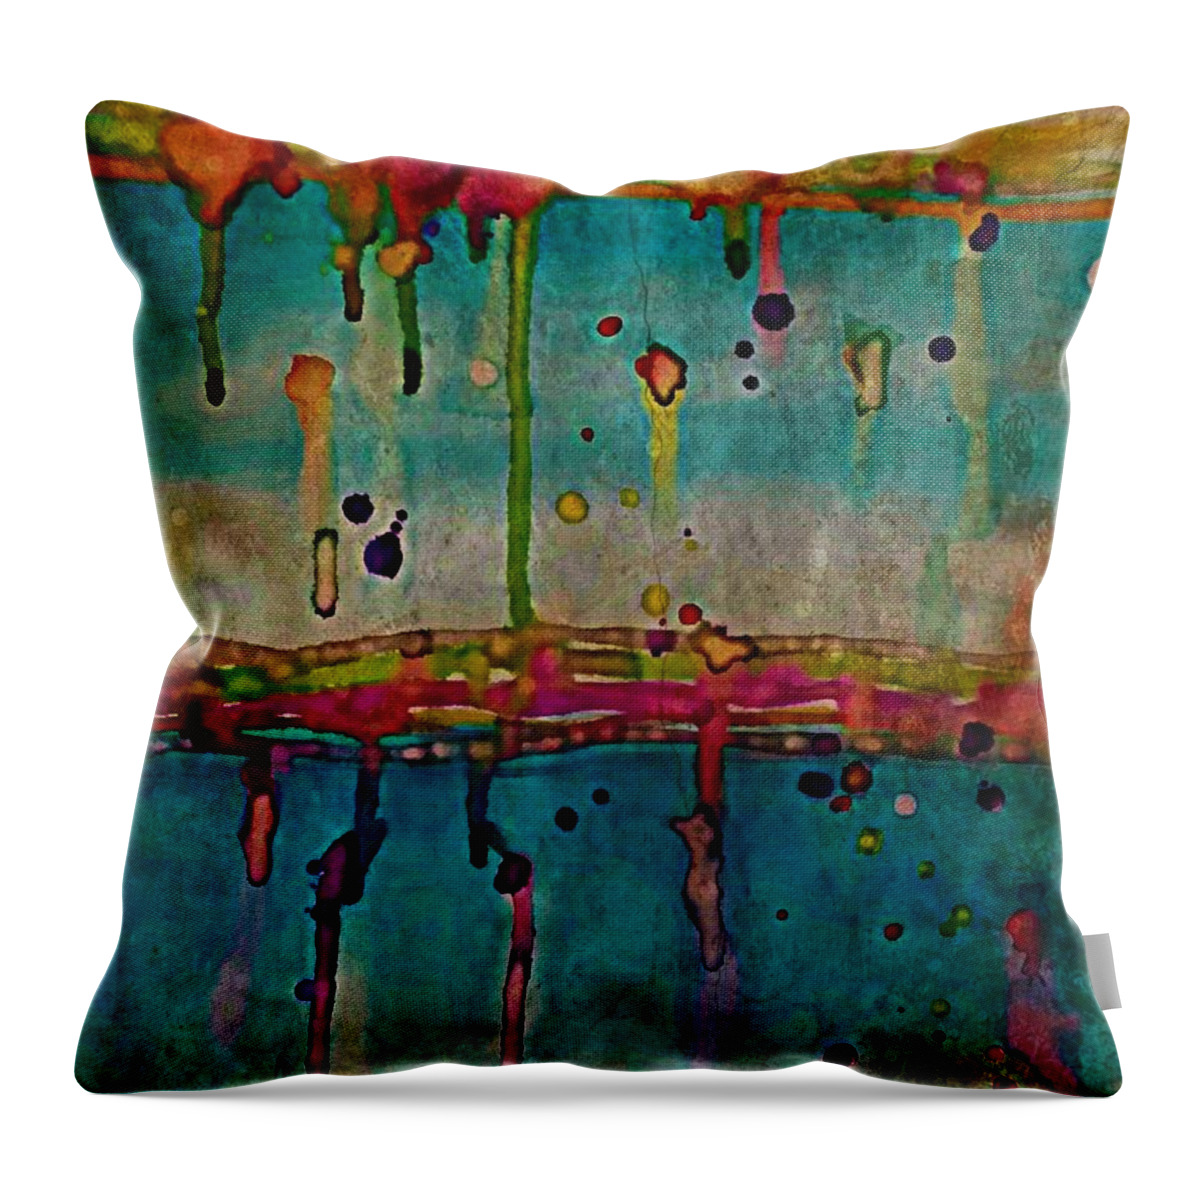 Rainy Day Throw Pillow featuring the painting Rainy Day by Diamante Lavendar